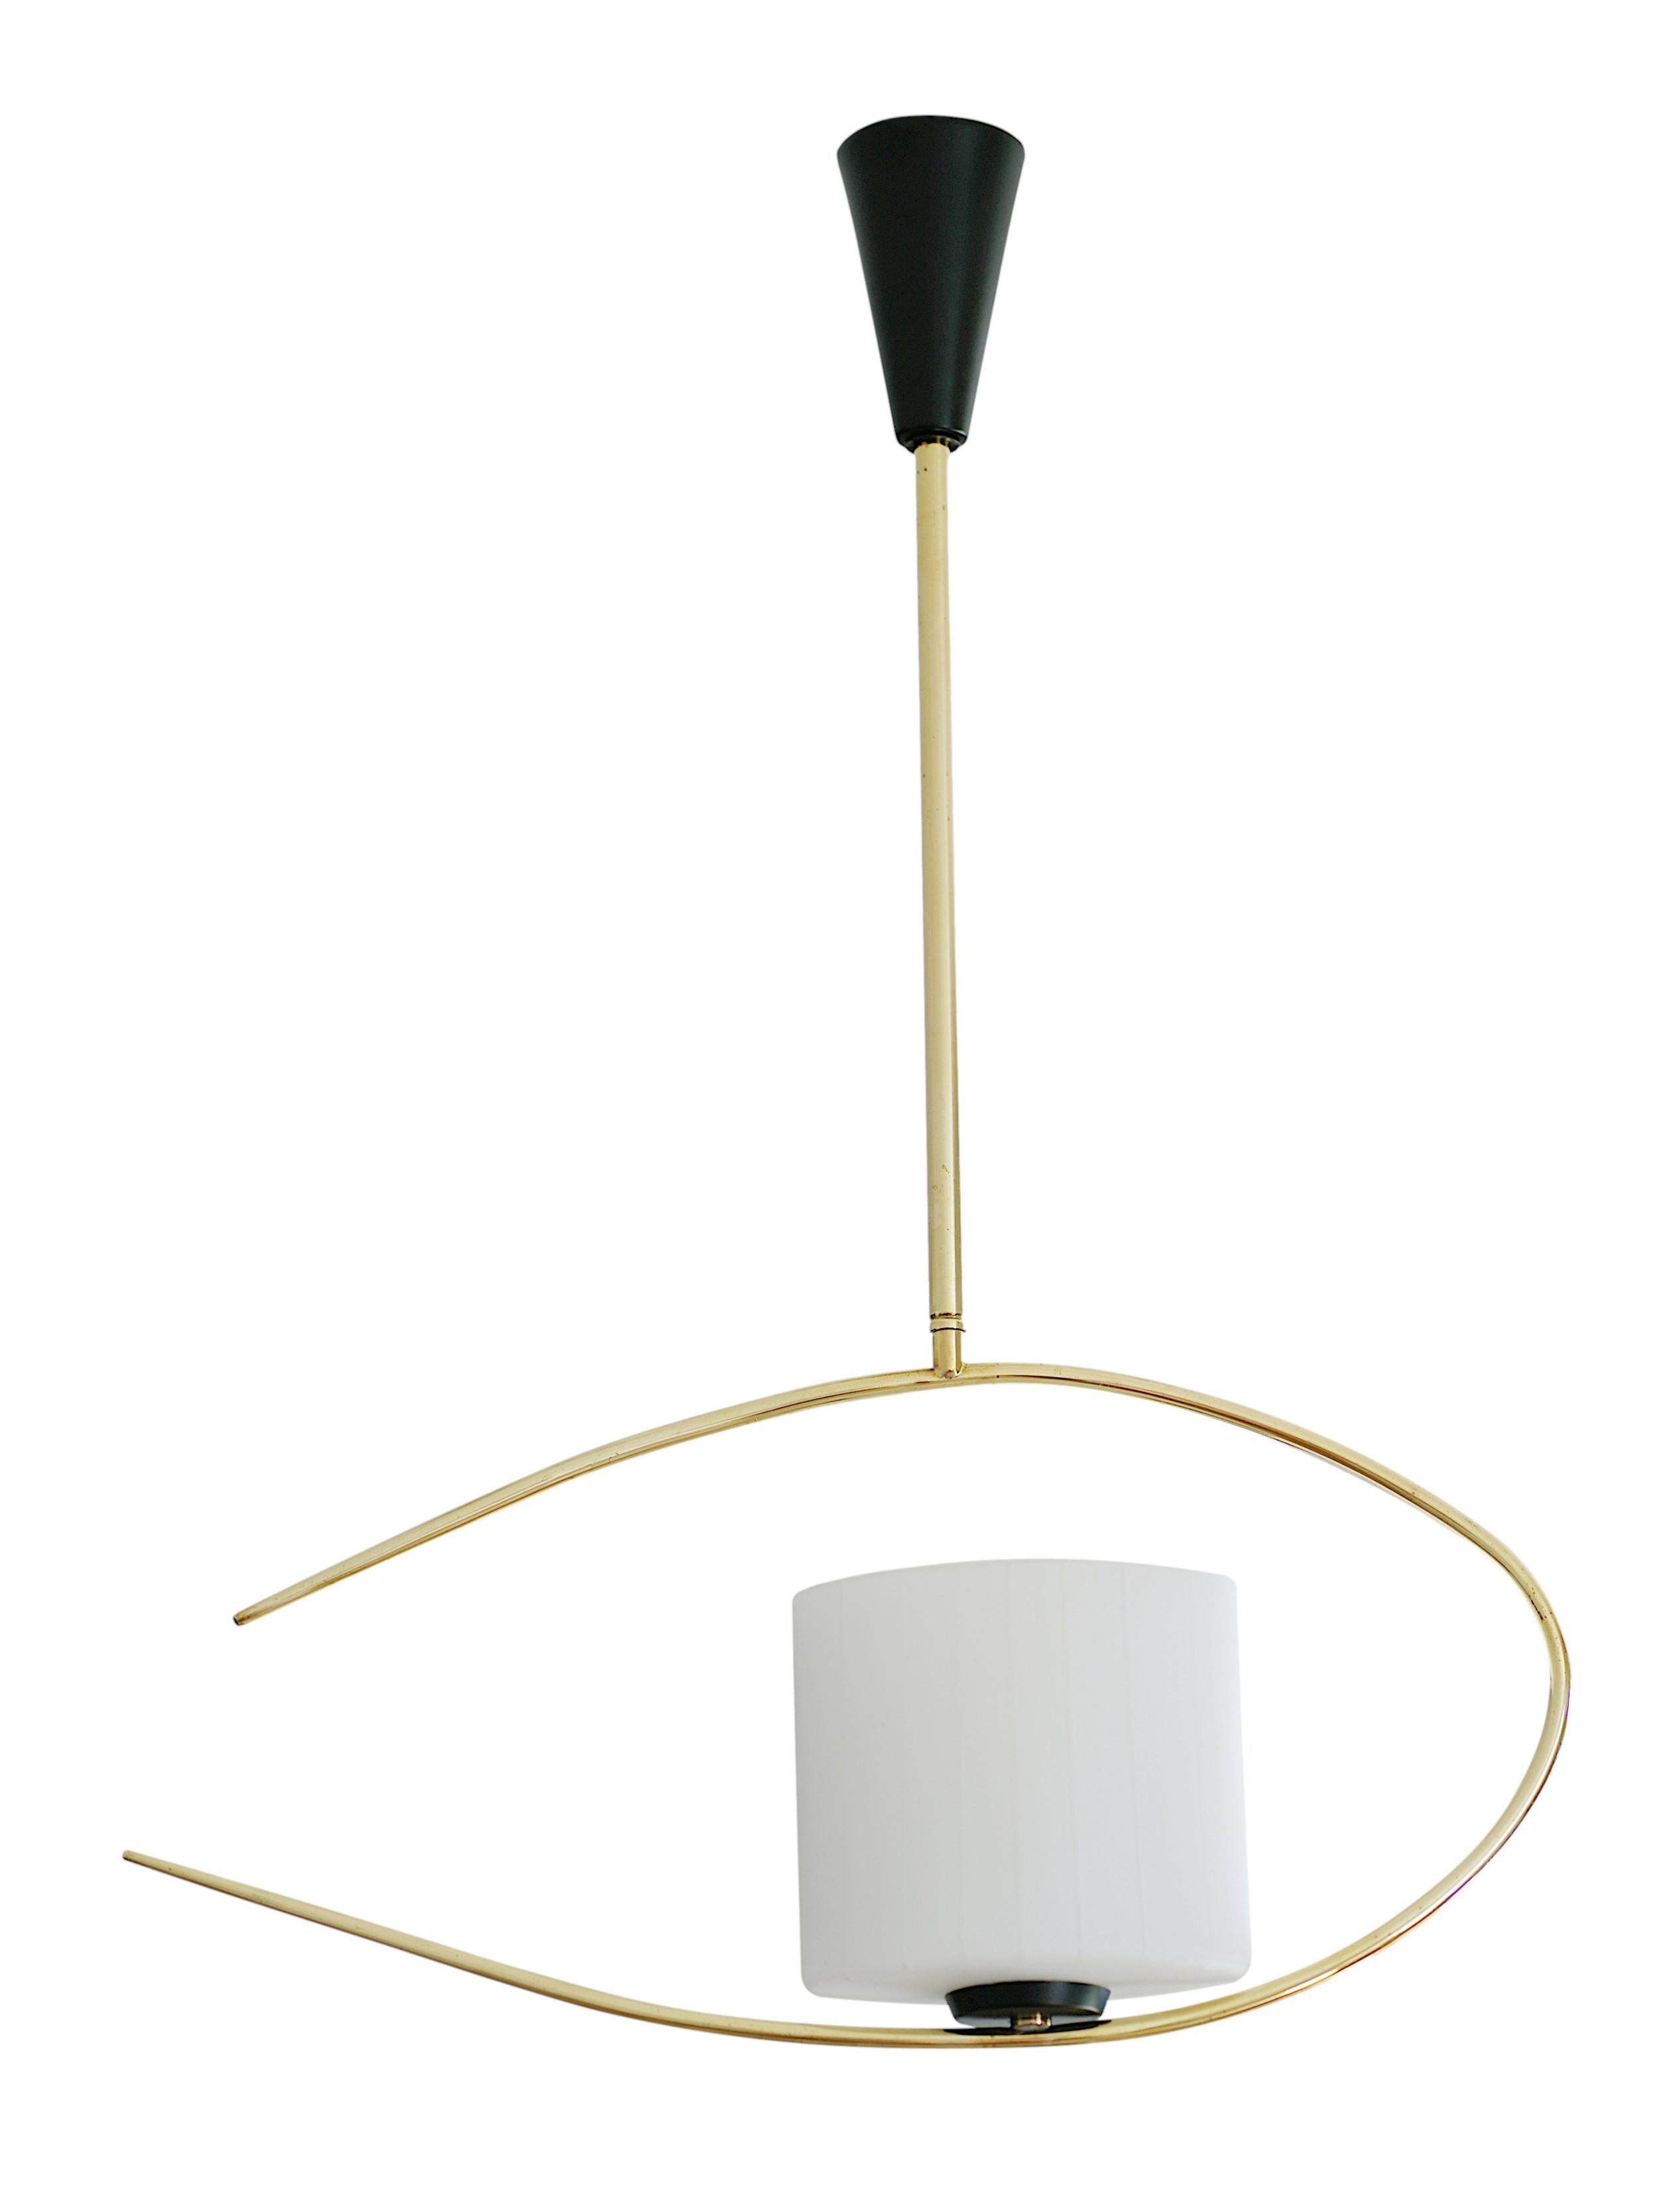 French Mid-century pendant chandelier by Arlus (Paris), France, 1950s. Original shade on itsr metal and brass fixture. Height: 25